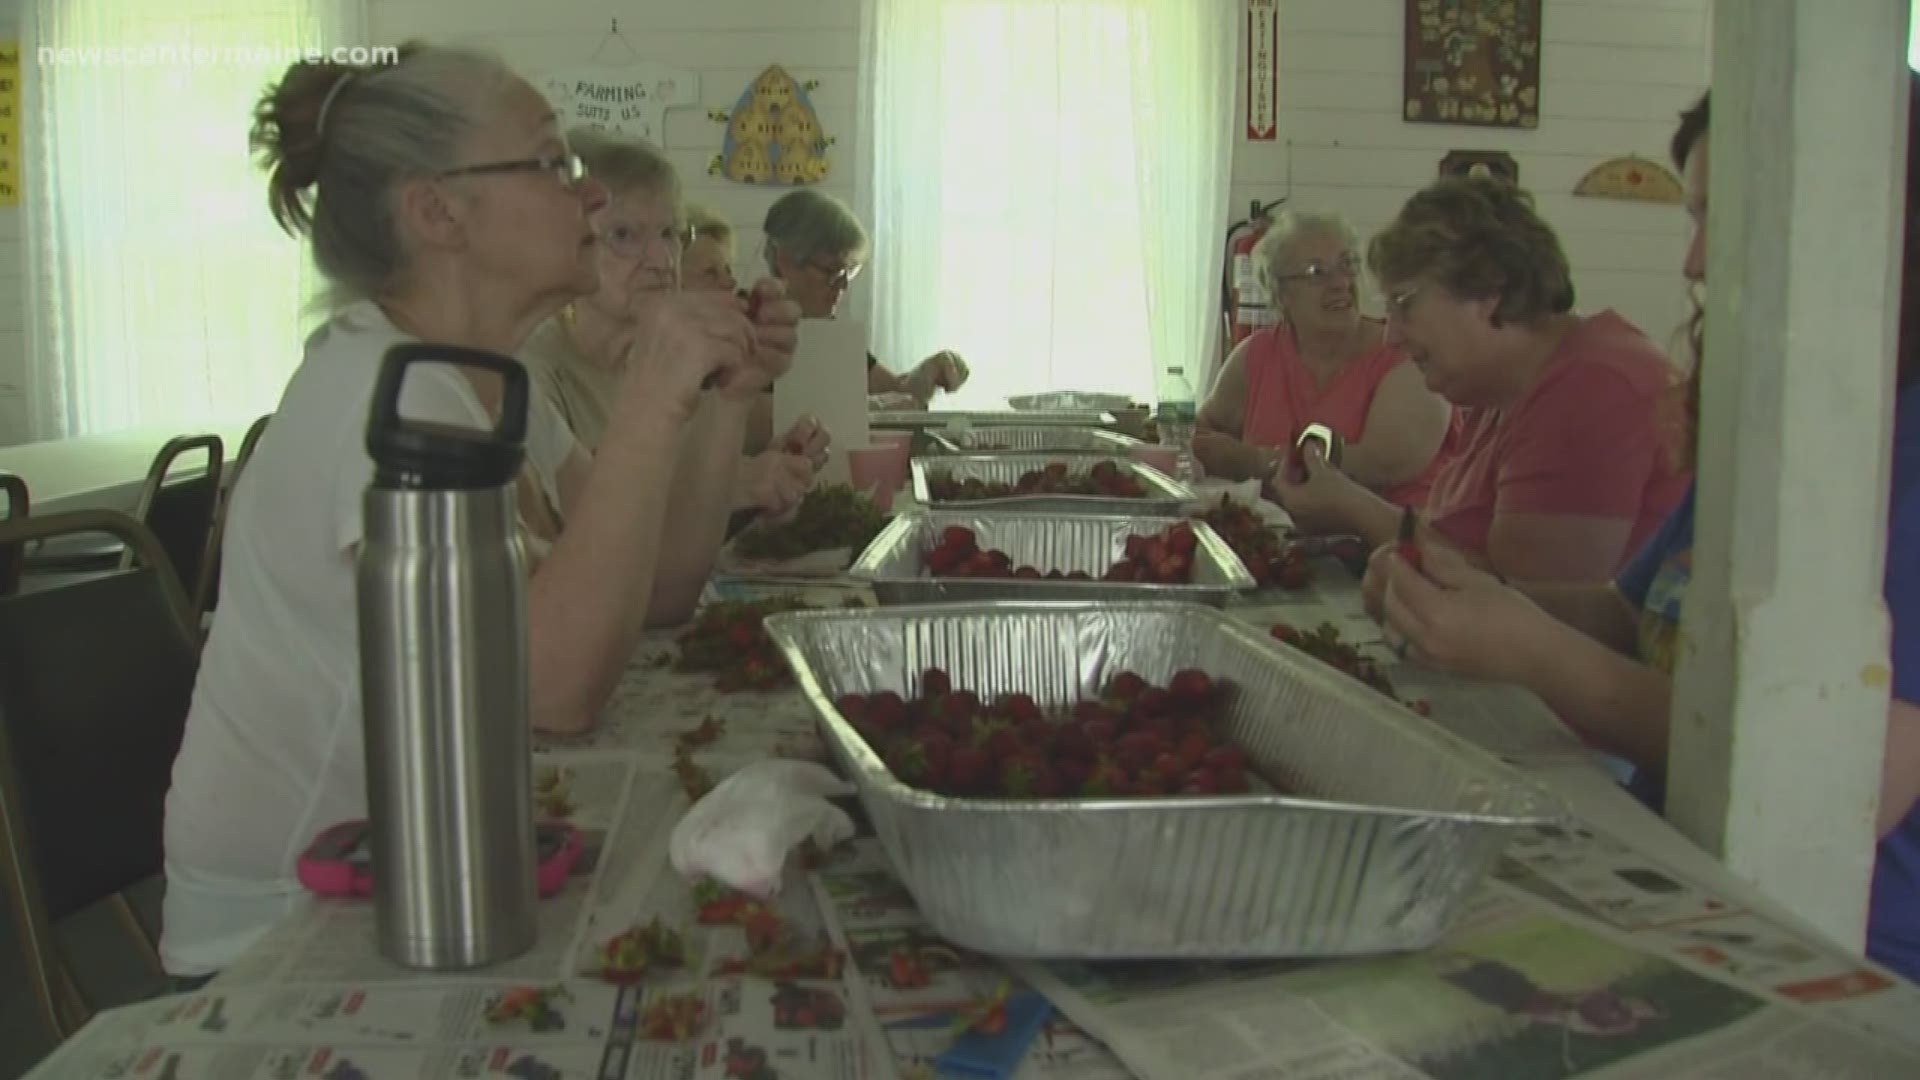 Despite a delay in strawberries this year, the Washington Ladies Guild persevered for its 73rd annual festival.